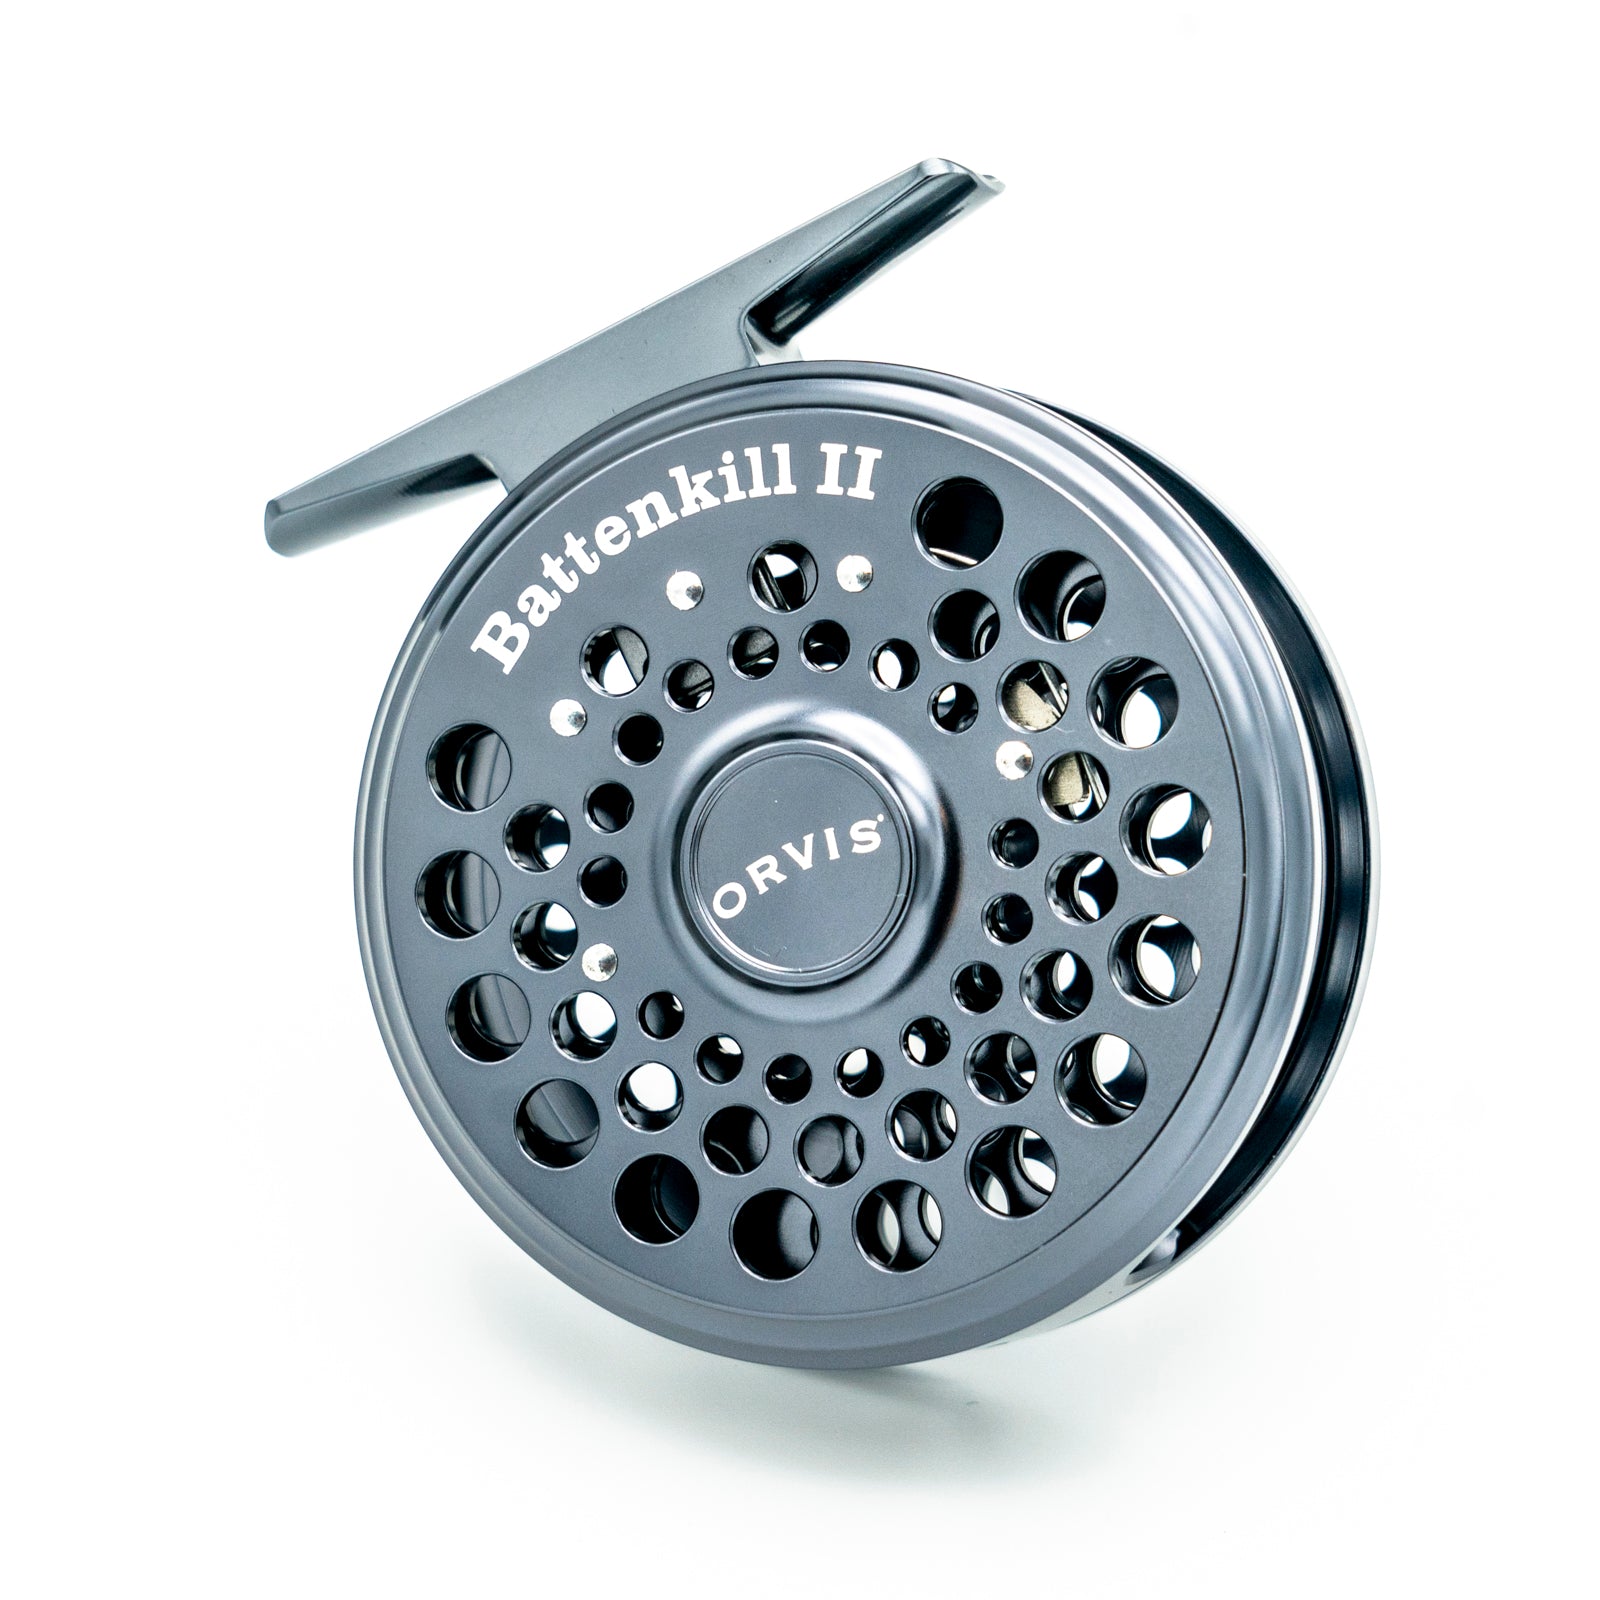 Sage Trout Spey Reel – Emerald Water Anglers